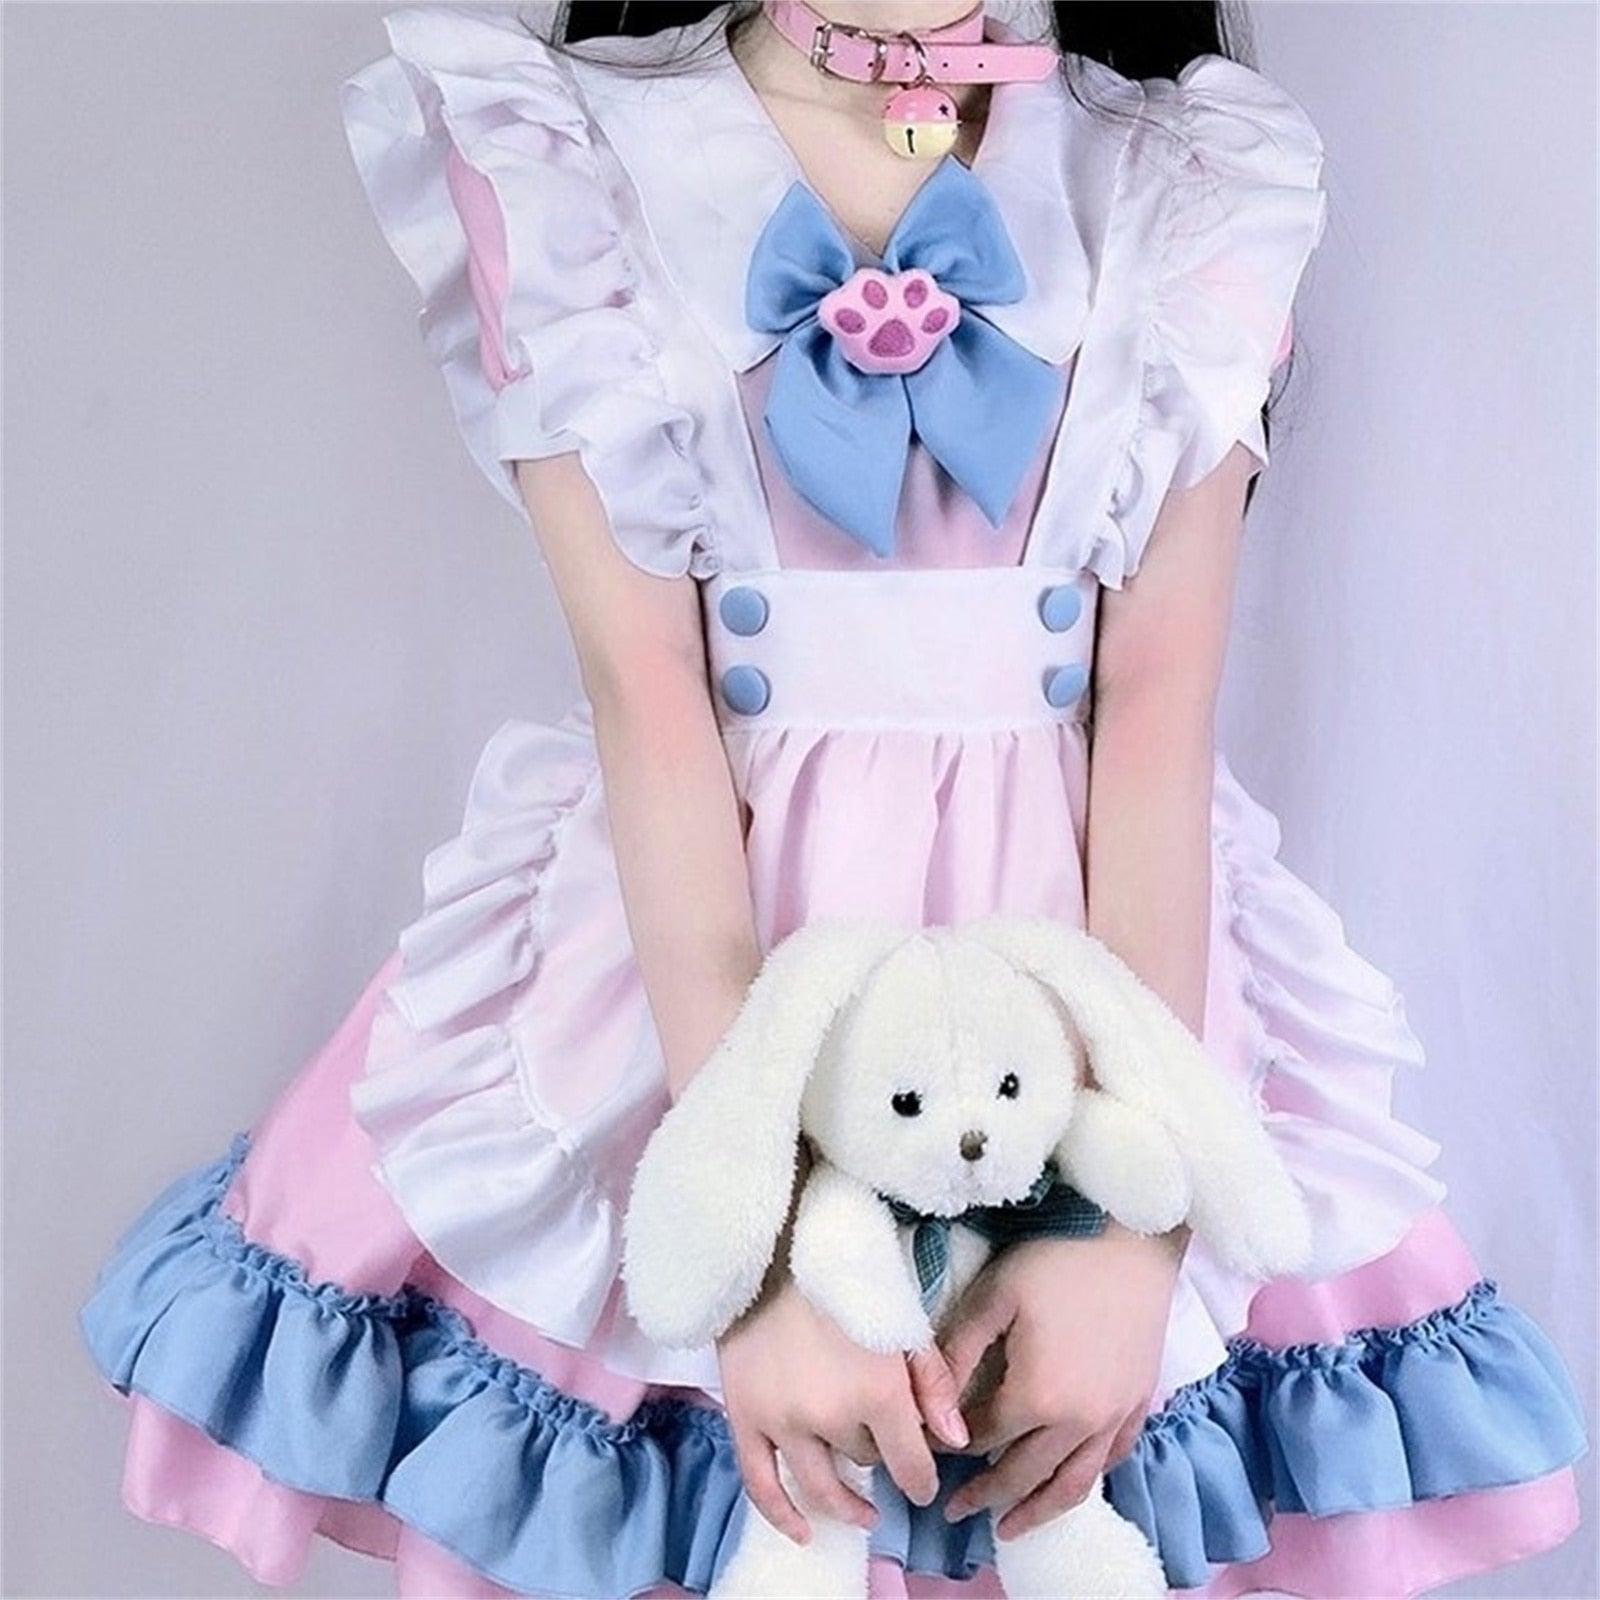 Kawaii Lolita Pink & Blue Maid Outfit - S Costumes - Femboy Fatale